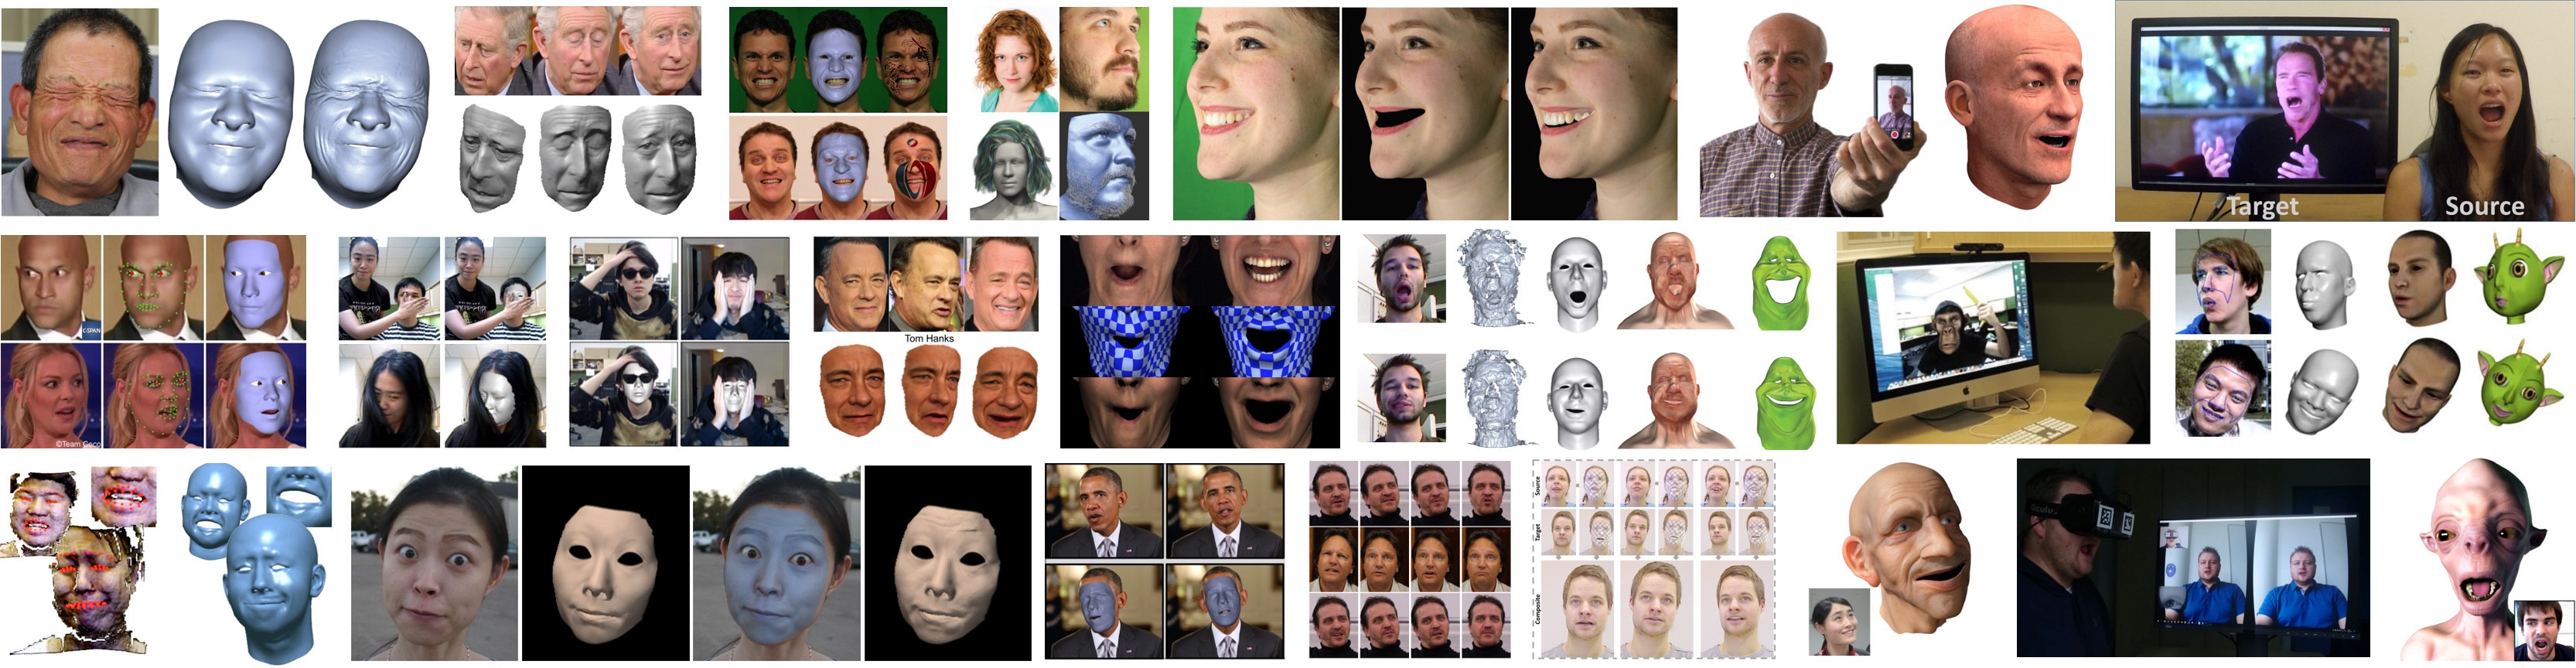 State of the Art on Monocular 3D Face Reconstruction, Tracking, and Applications